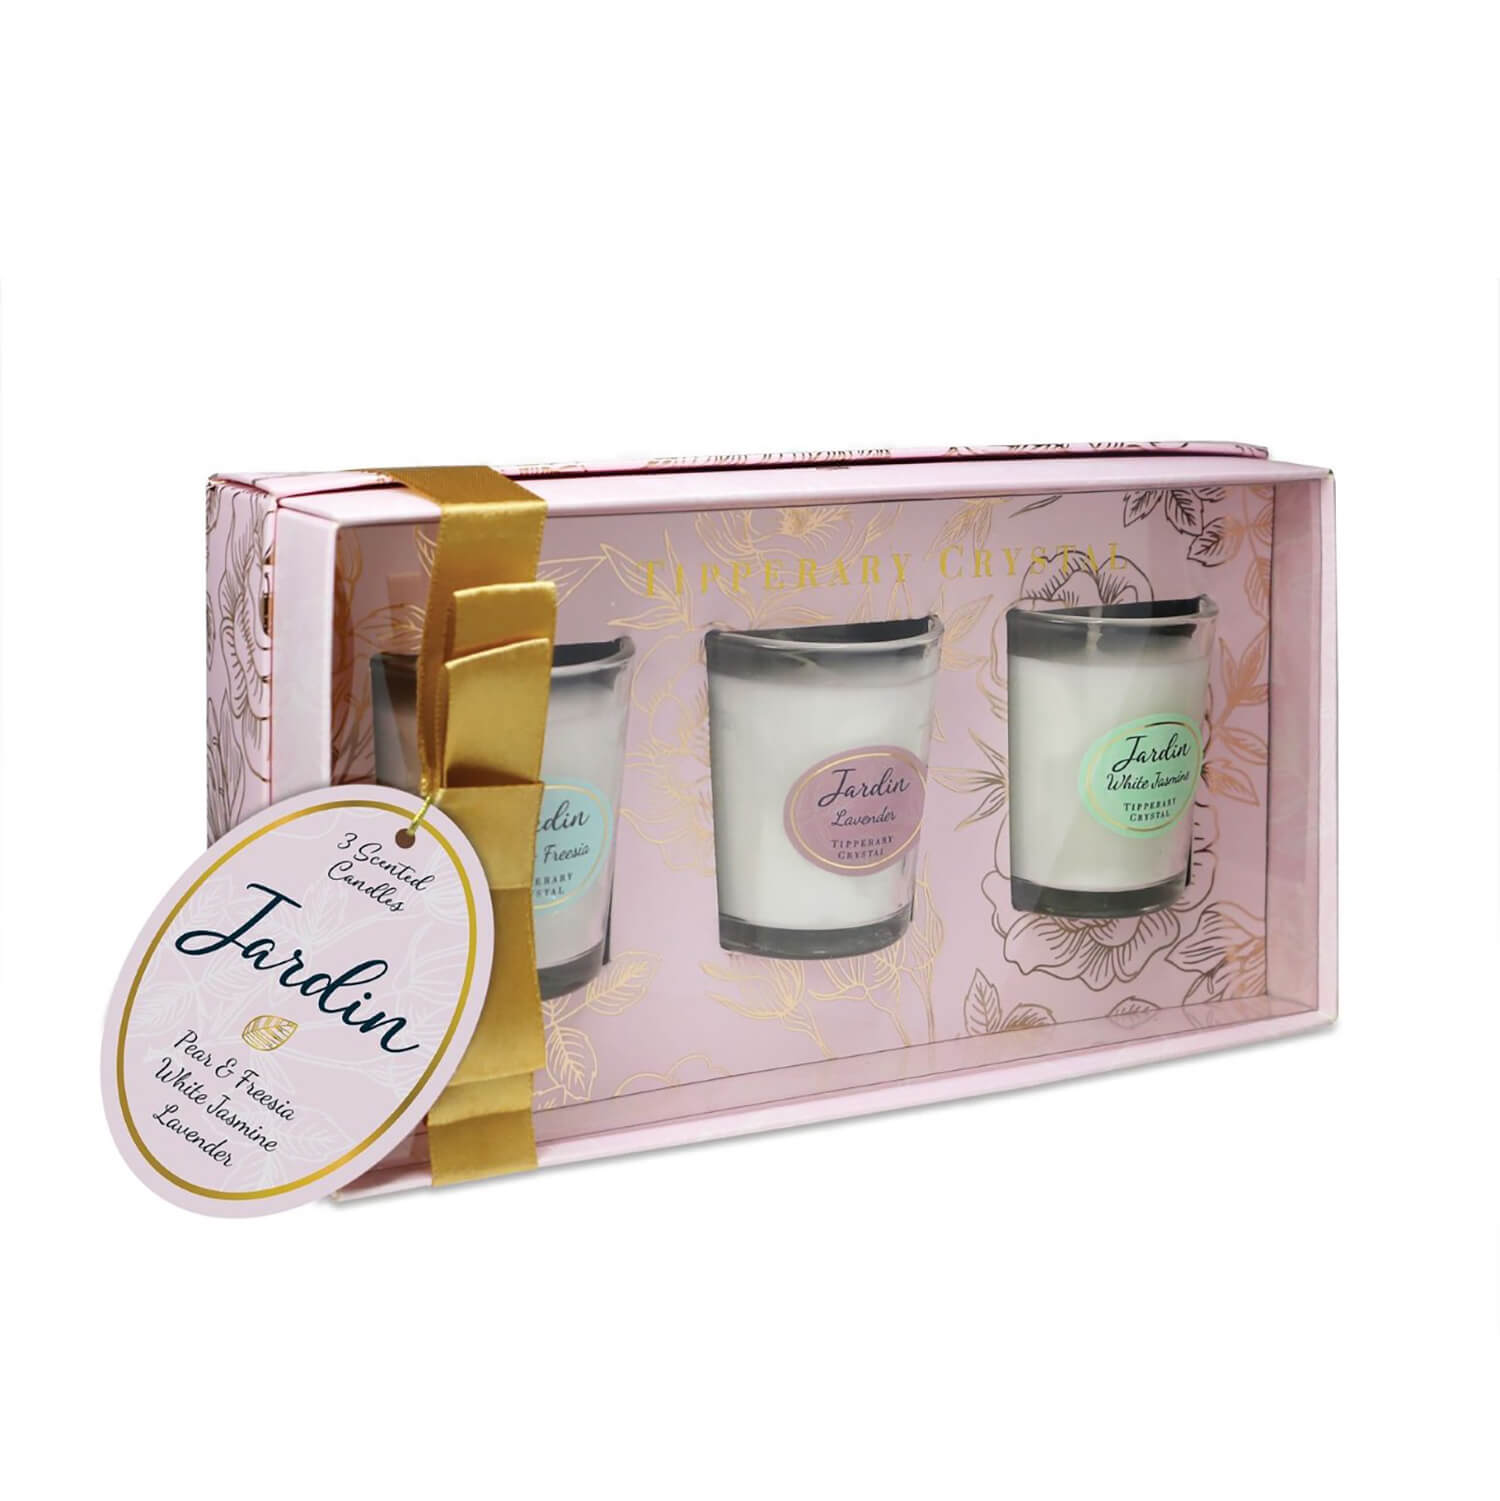 Tipperary Crystal Jardin Collection Assorted Set Of 3 Mini Candles - Pear &amp; Freesia, White Jasmine, Lavender 1 Shaws Department Stores